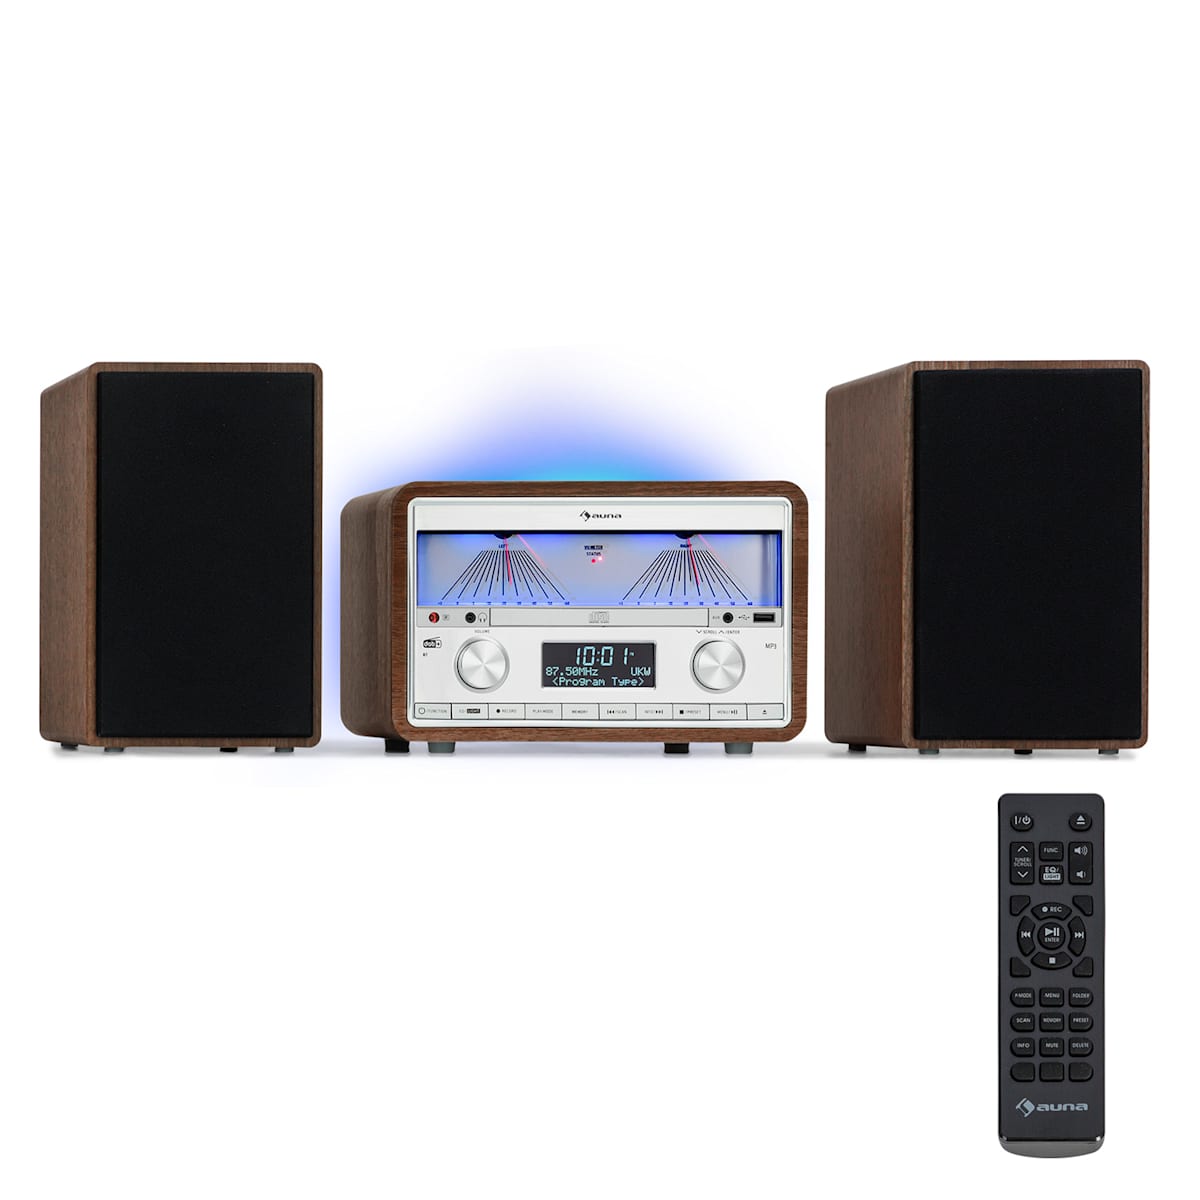 Elton DAB micro stereo system, CD player, DAB/DAB+/FM radio, 2 x 25  watts RMS 2-way speakers, media player, Bluetooth, MP3 from CD and USB